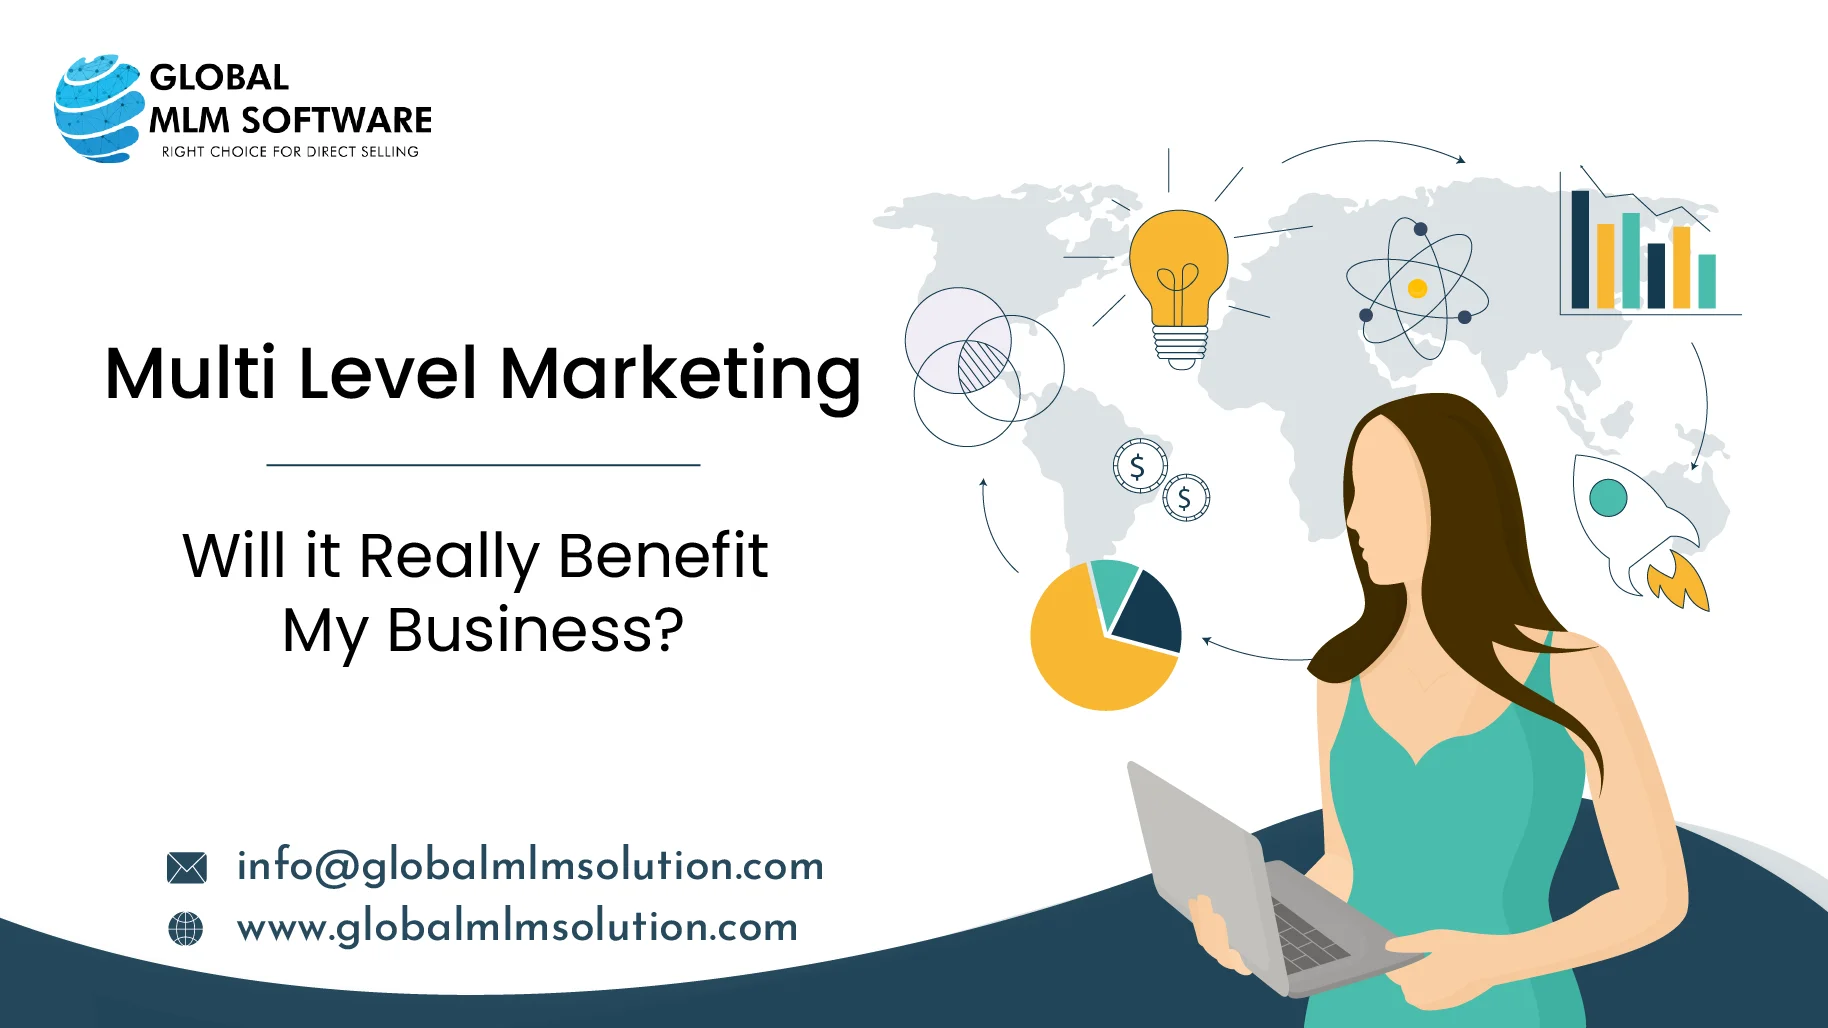 Multi Level Marketing: Will it Really Benefit My Business?